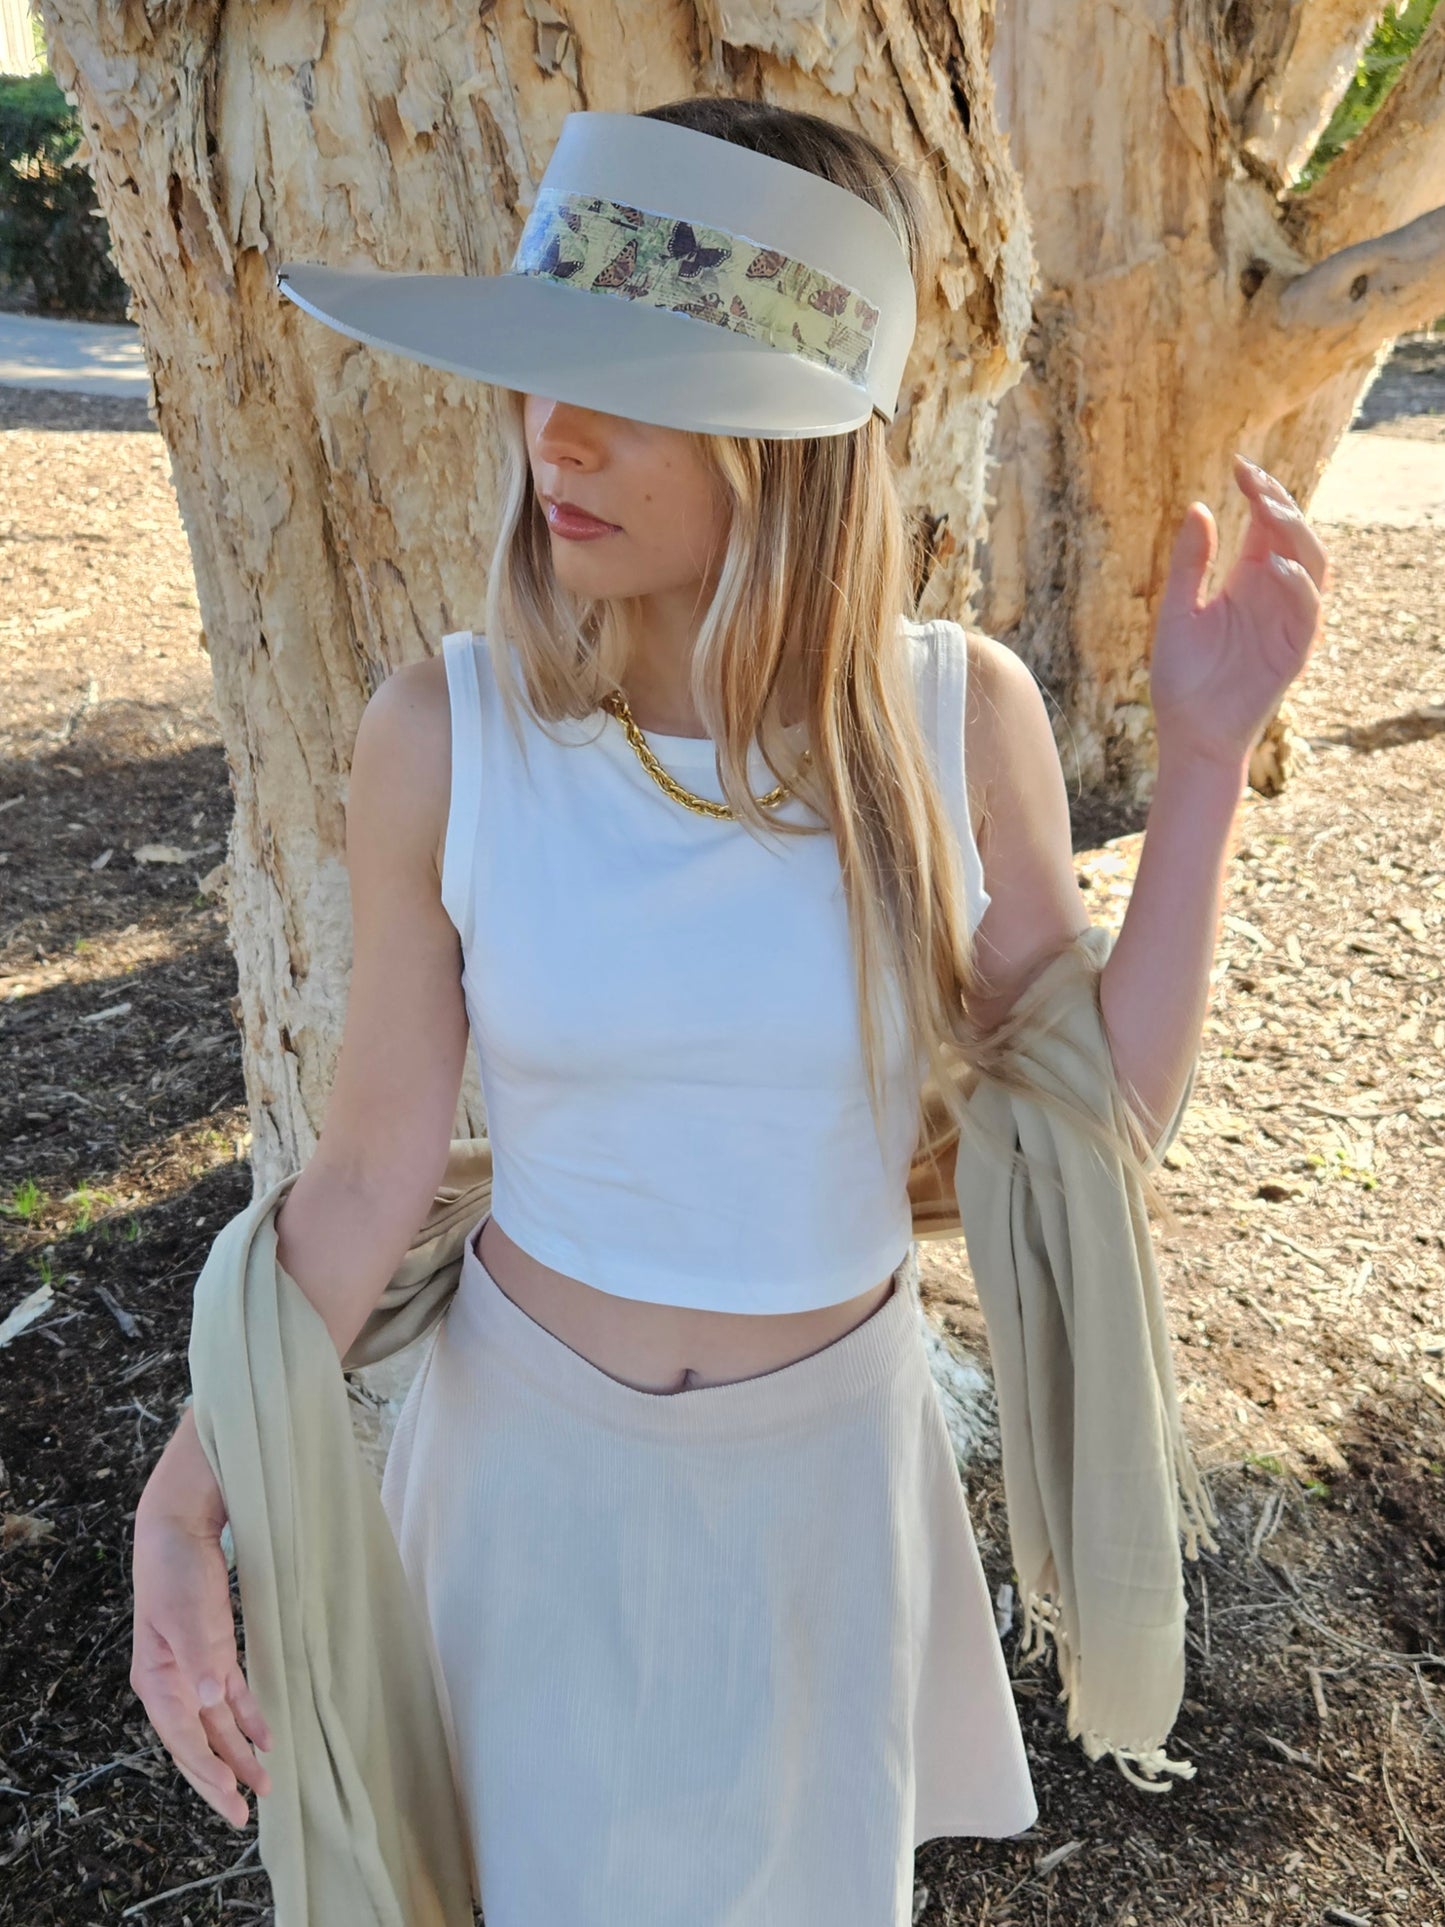 Tall Truly Taupe Audrey Foam Sun Visor Hat with Neutral Butterfly Band and Silver Clamp: Walks, Brunch, Swim, Garden, Golf, Easter, Church, No Headache